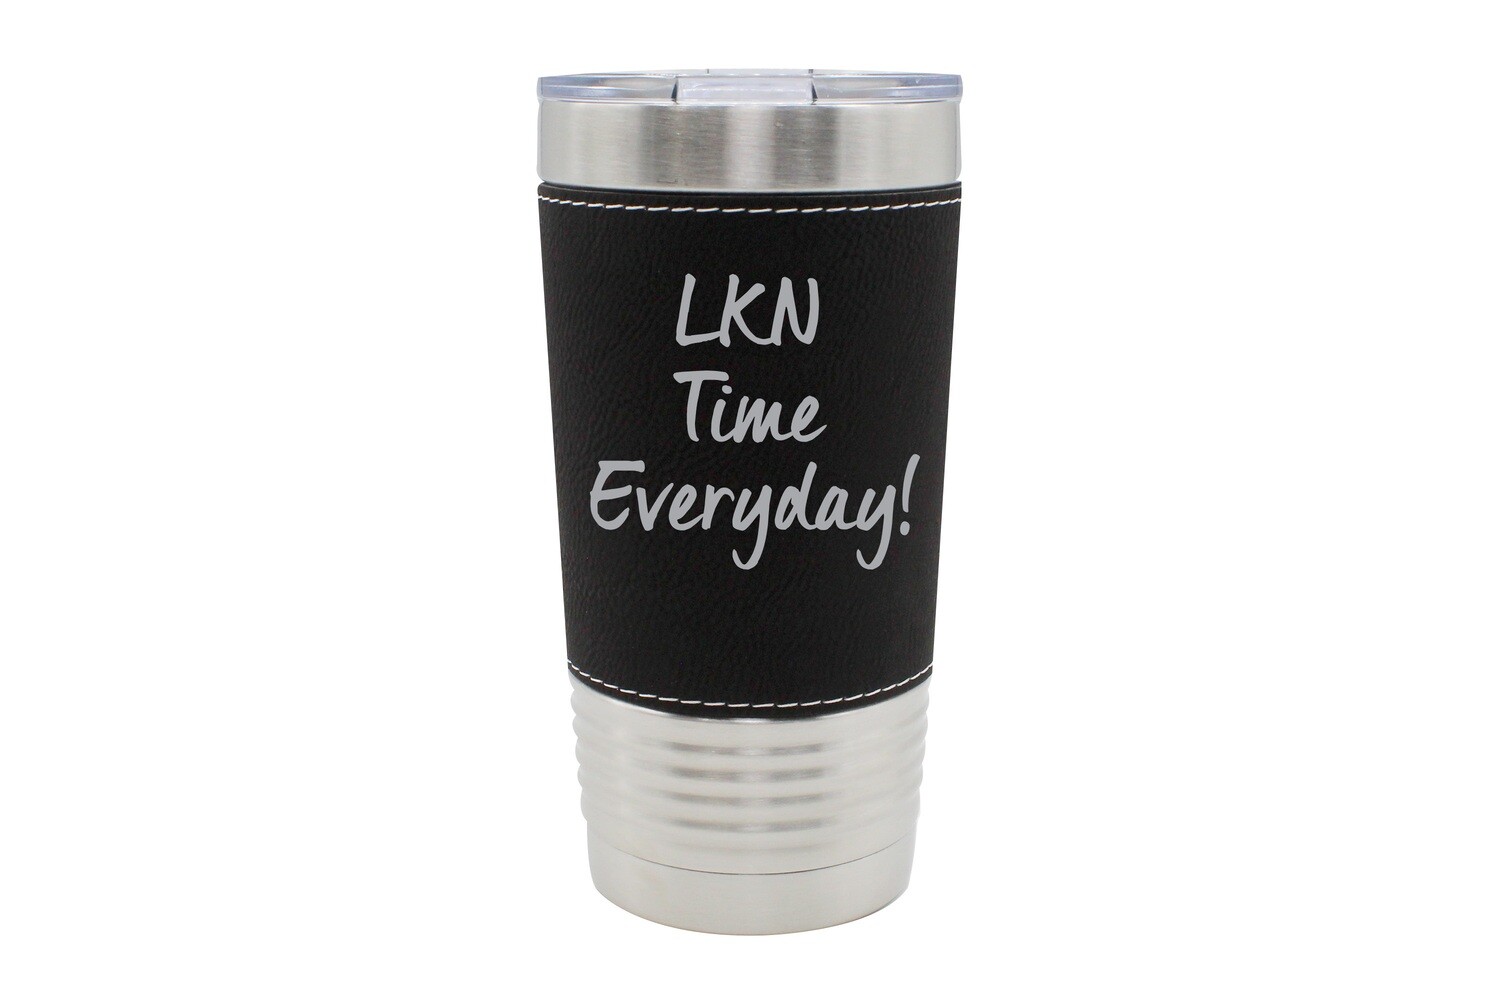 Leatherette 20 oz Customized Location "LKN" Time Everyday Personalized Tumbler